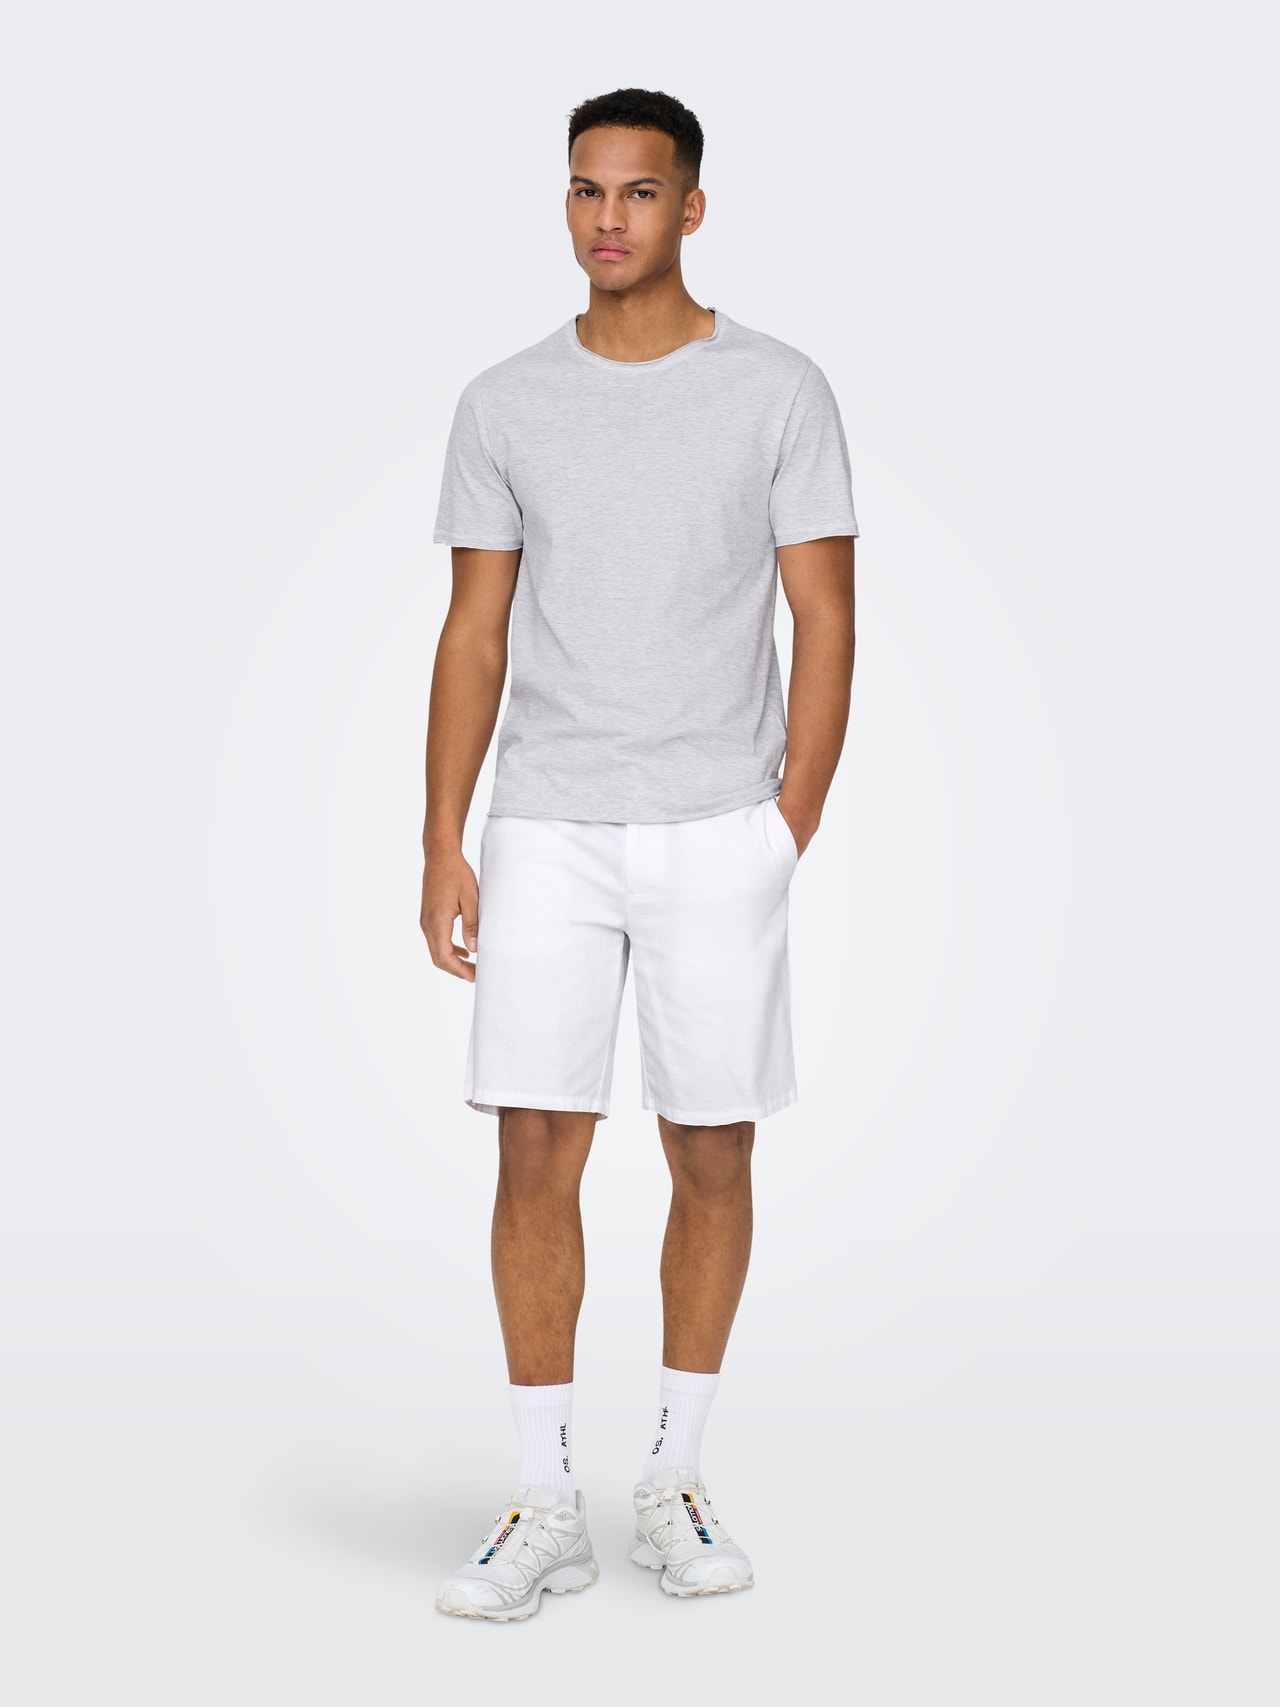 ONLY & SONS Regular Fit Round Neck T-Shirt -White - 22005108